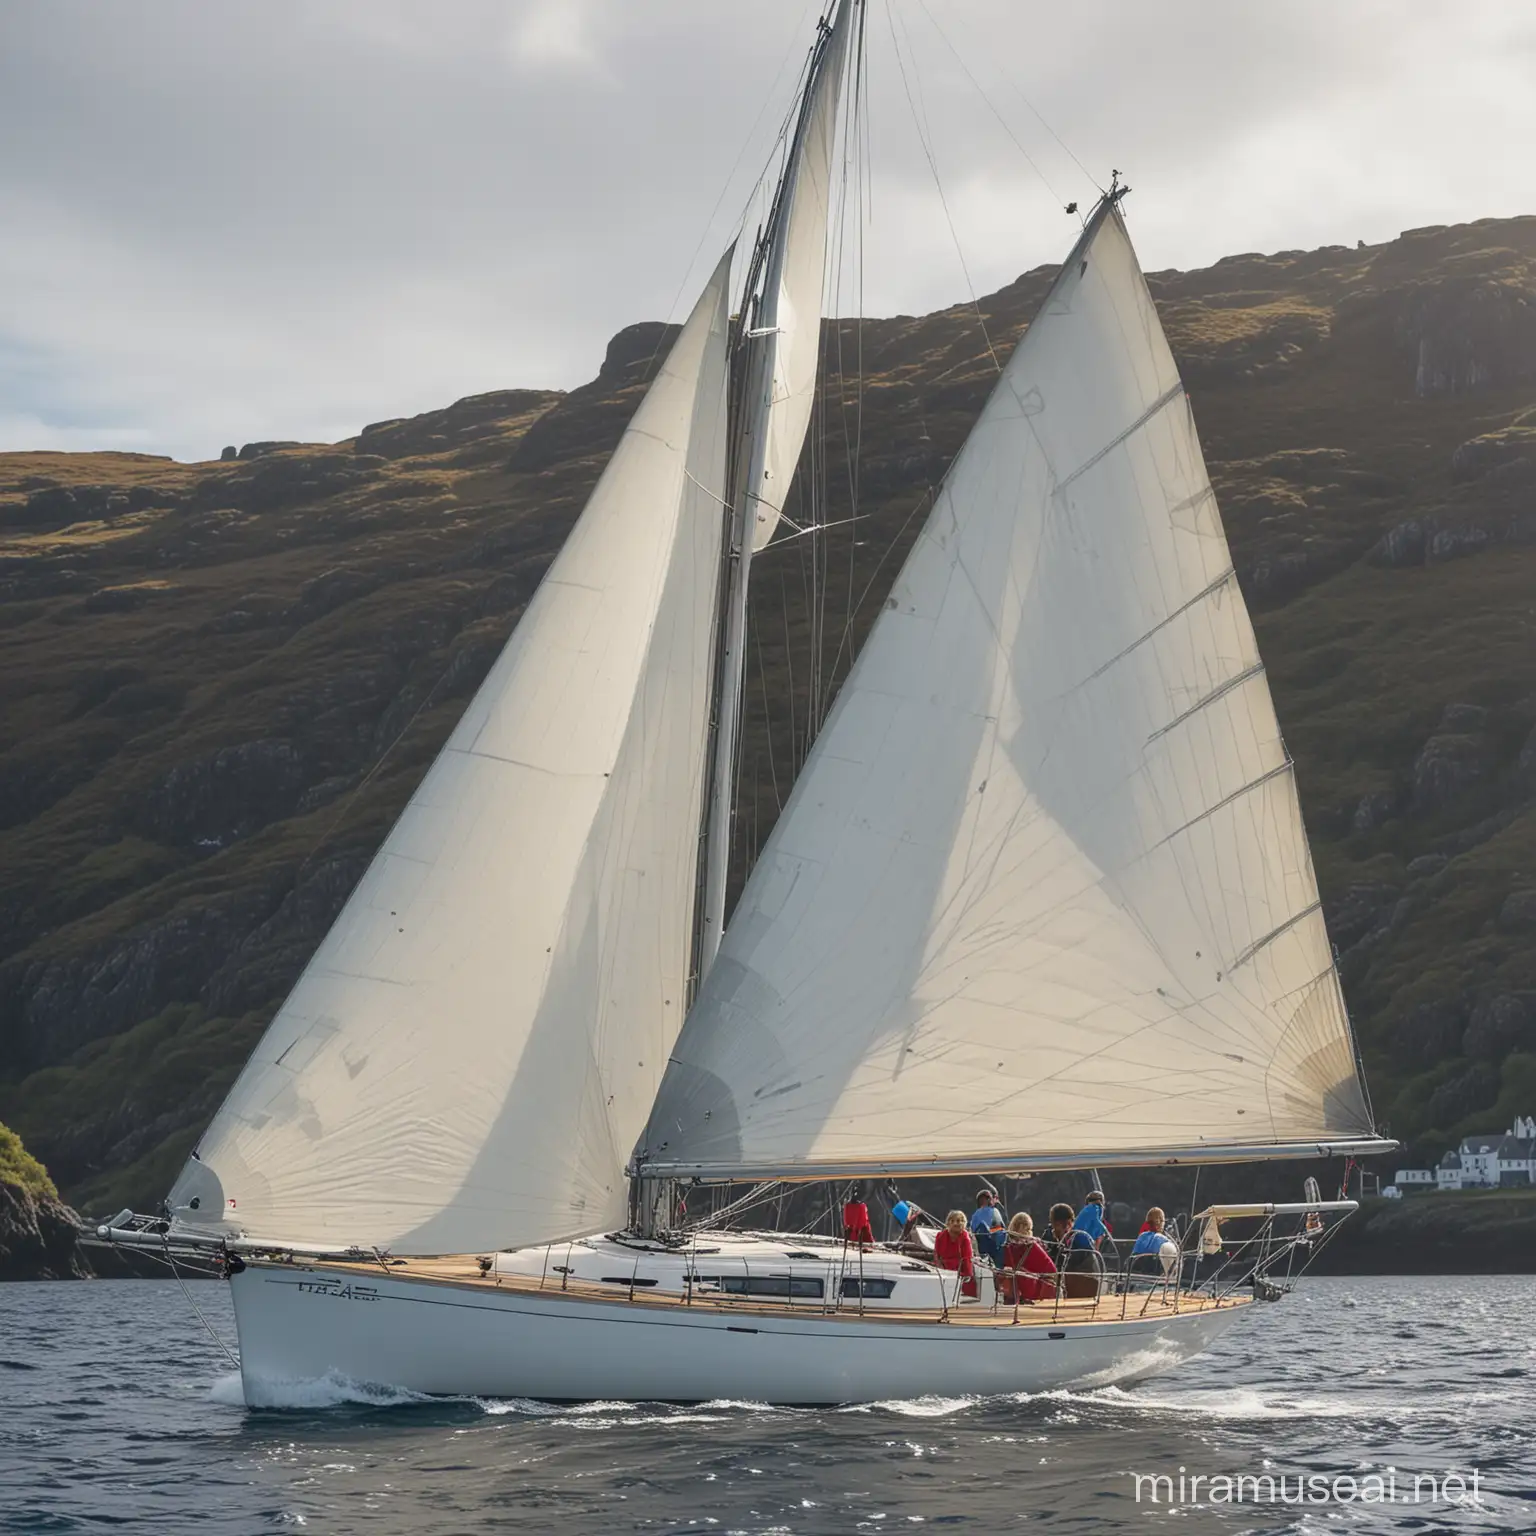 Sailing yacht, type Etap28, under full sail, at sea, blond girl at the rudder, in the Portree harbour scotland